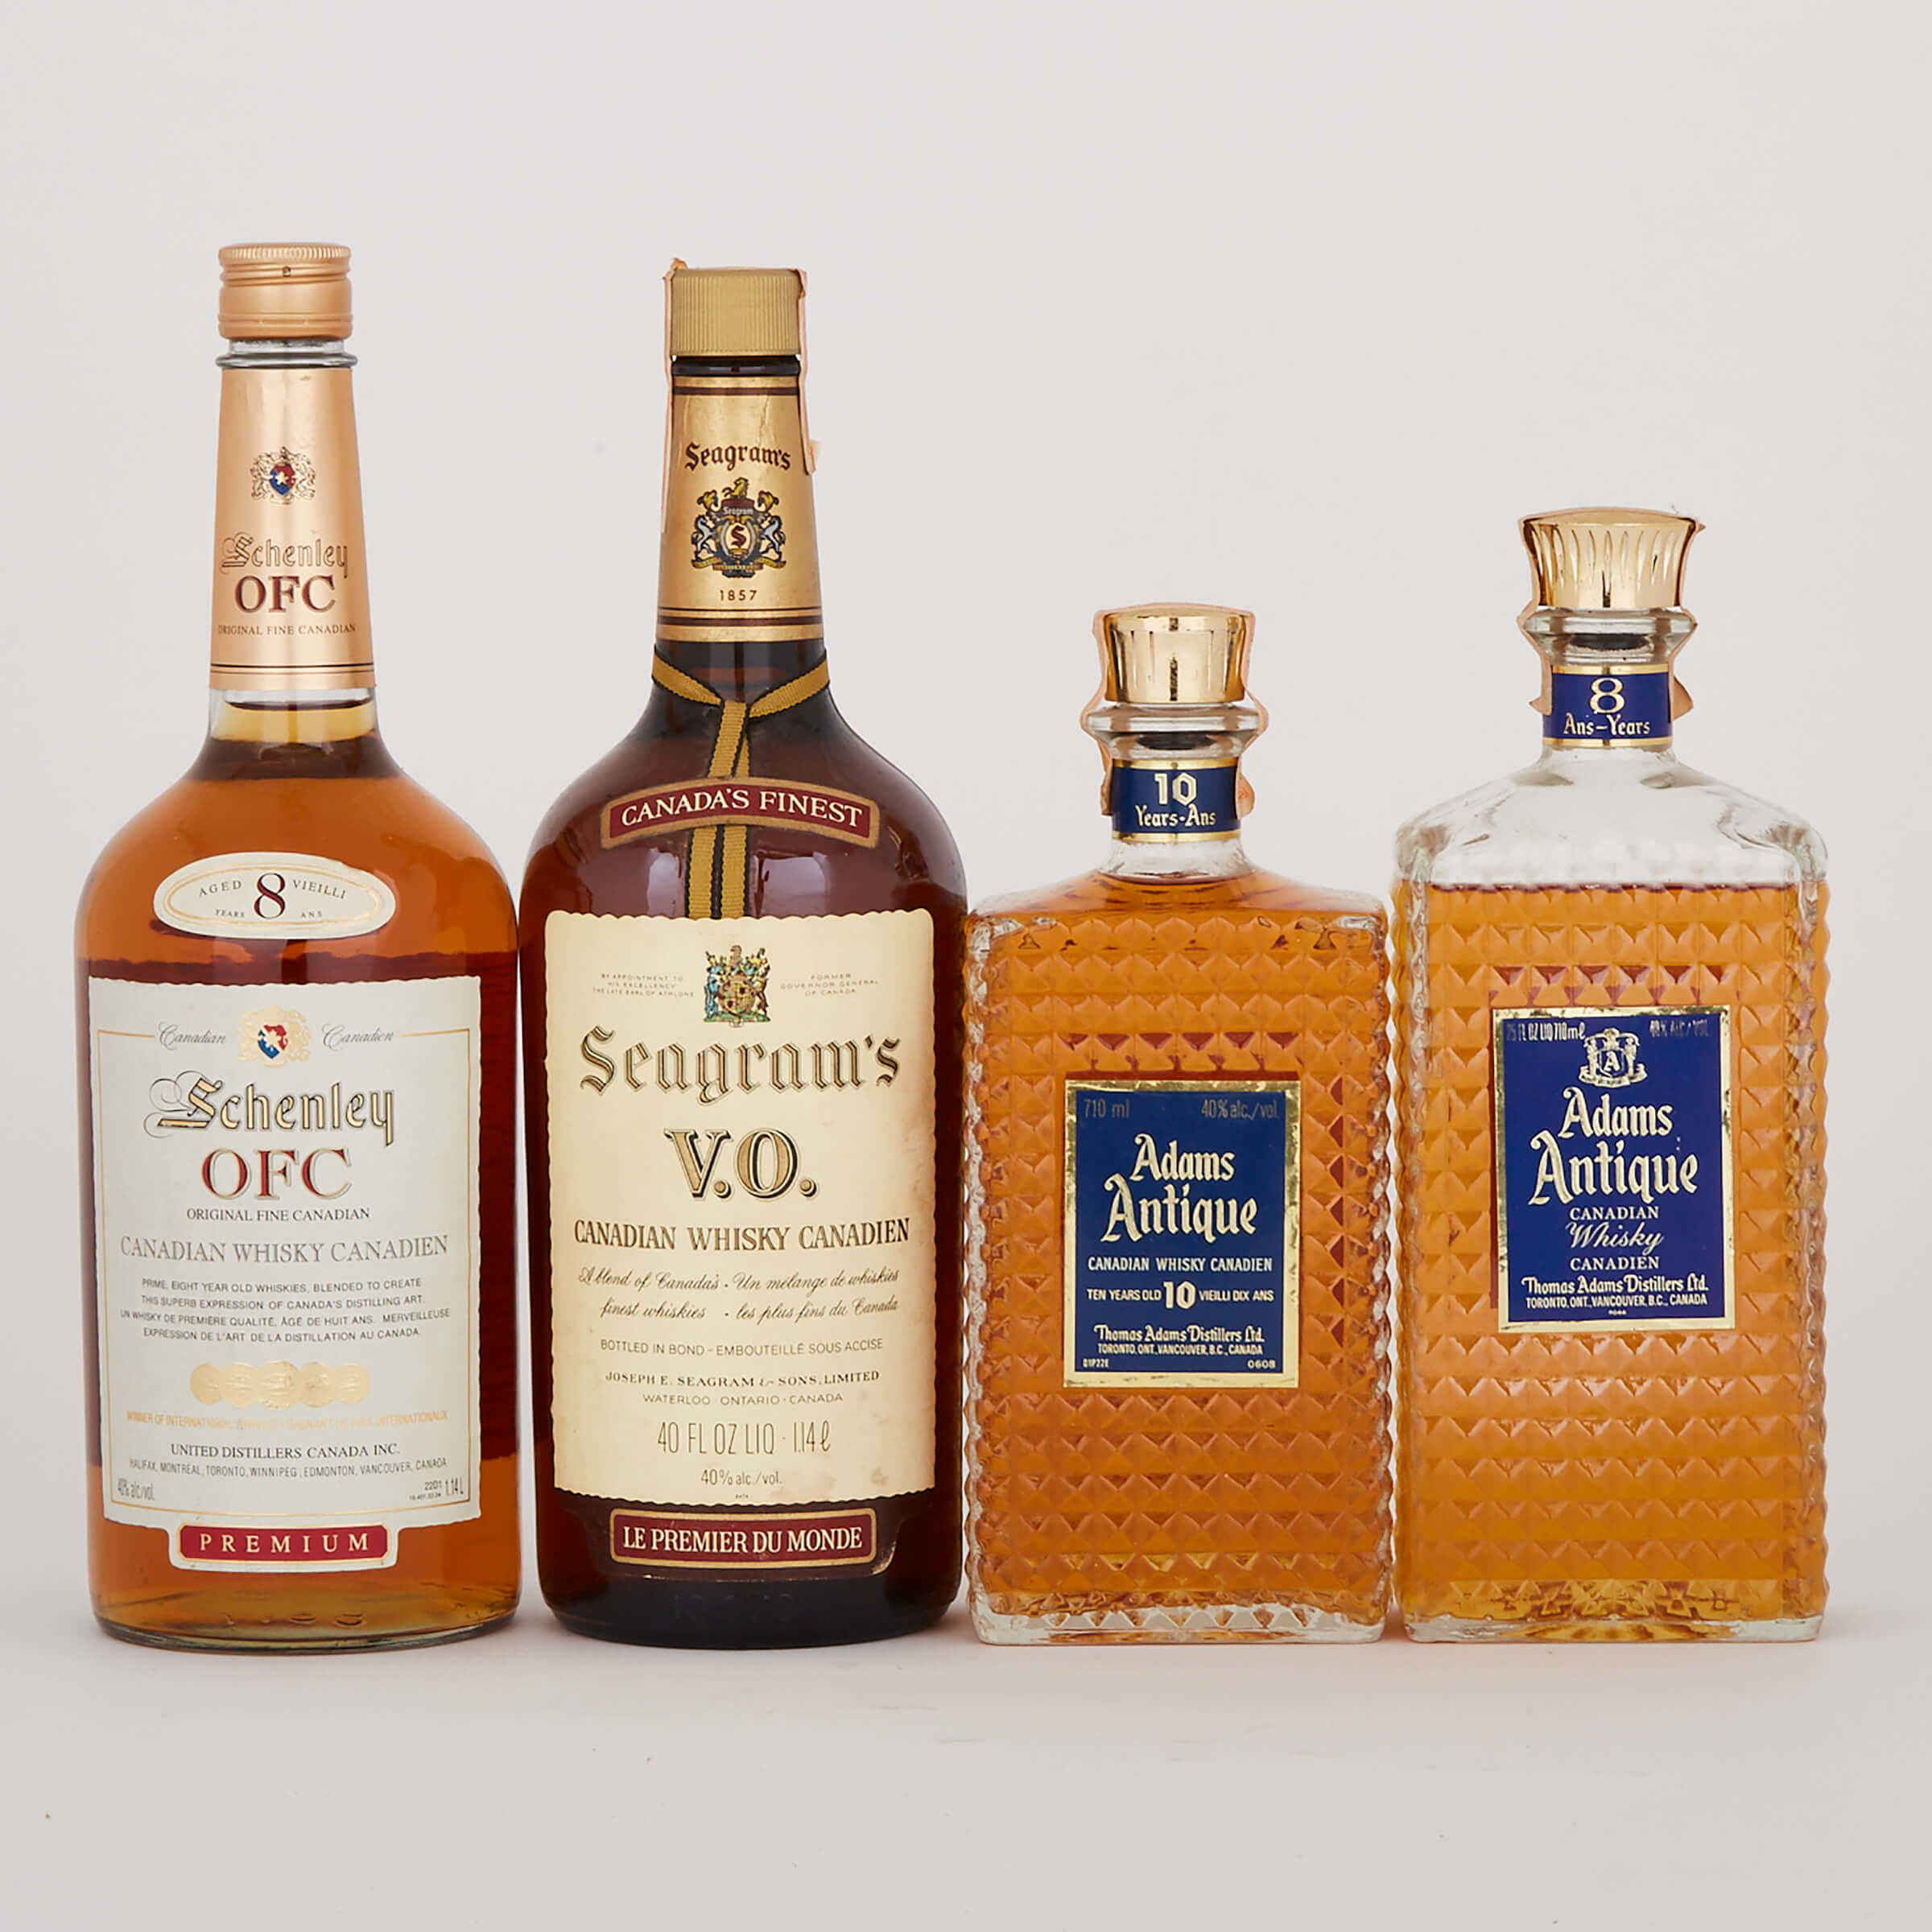 ADAMS ANTIQUE CANADIAN WHISKY 10 YEARS (ONE 710 ML)
ADAMS ANTIQUE CANADIAN WHISKY 8 YEARS (ONE 710 ML)
SCHENLEY CANADIAN WHISKY OFC 8 YEARS (ONE 1.14 L)
SEAGRAM'S V.O BLENDED CANADIAN WHISKY 6 YEARS (ONE 40 OZ.)